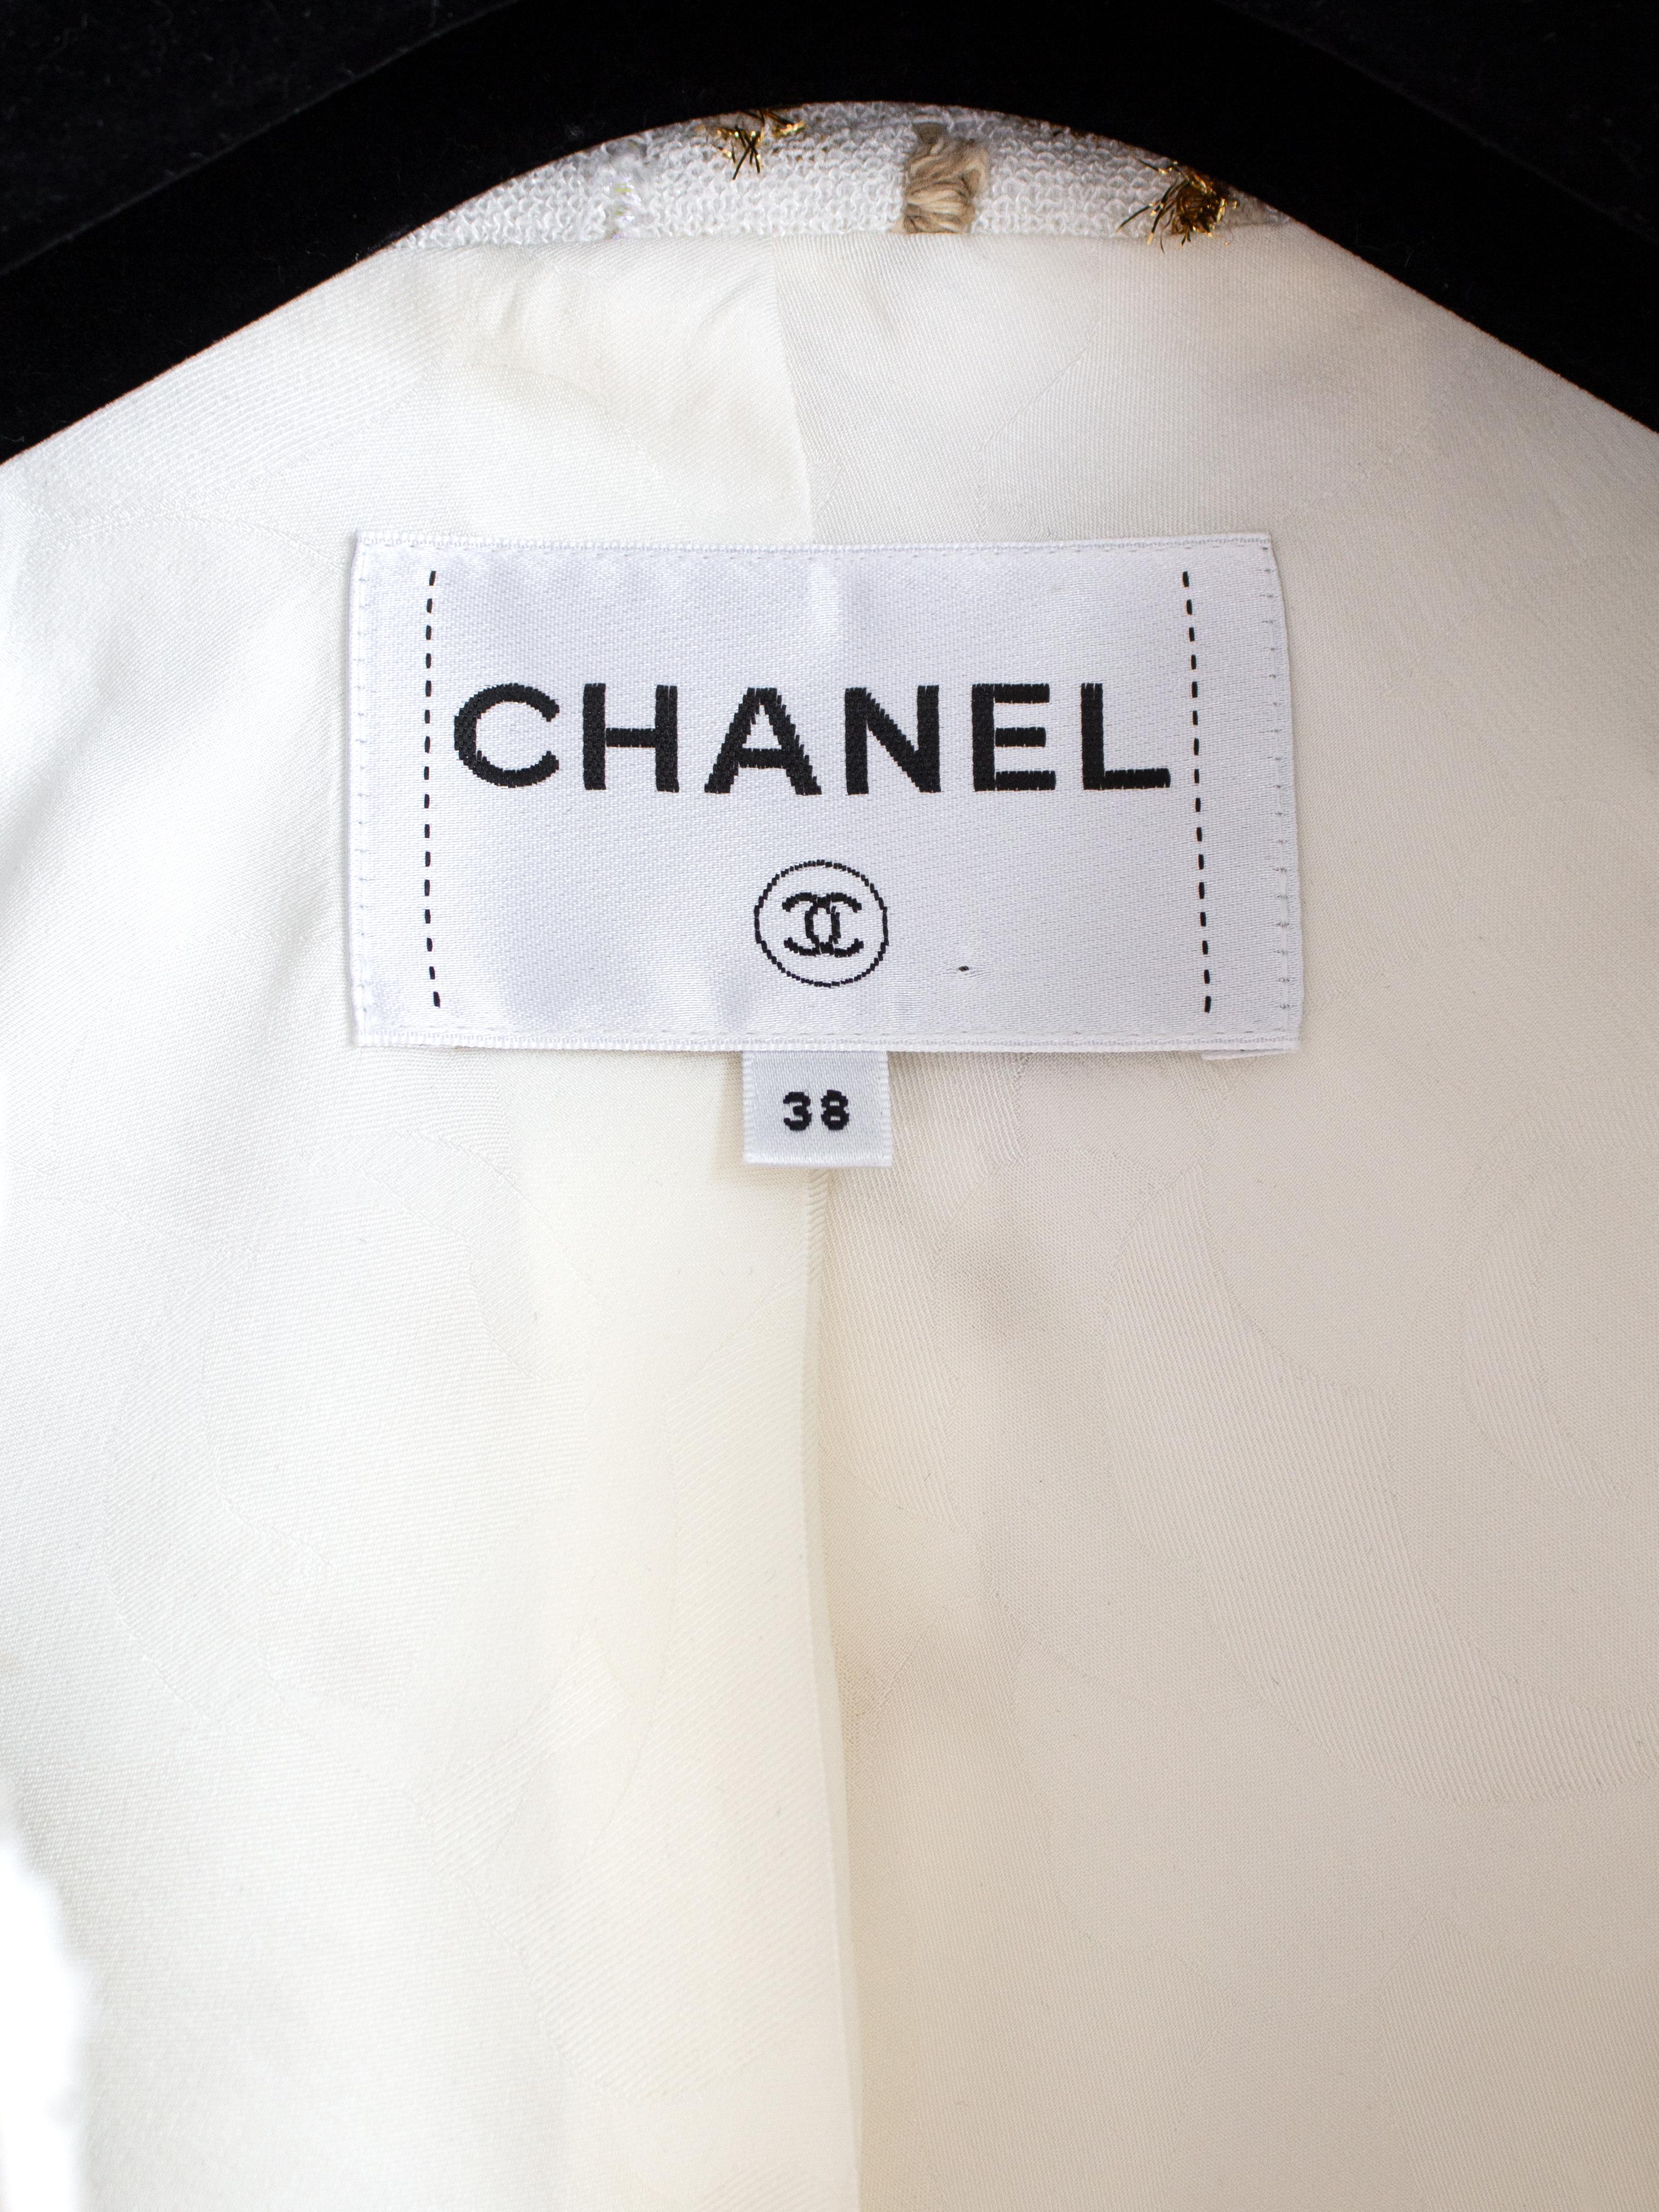 Chanel S/S 2019 By The Sea White Gold Black Bow Embellished 19P 19S Jacket  For Sale 4